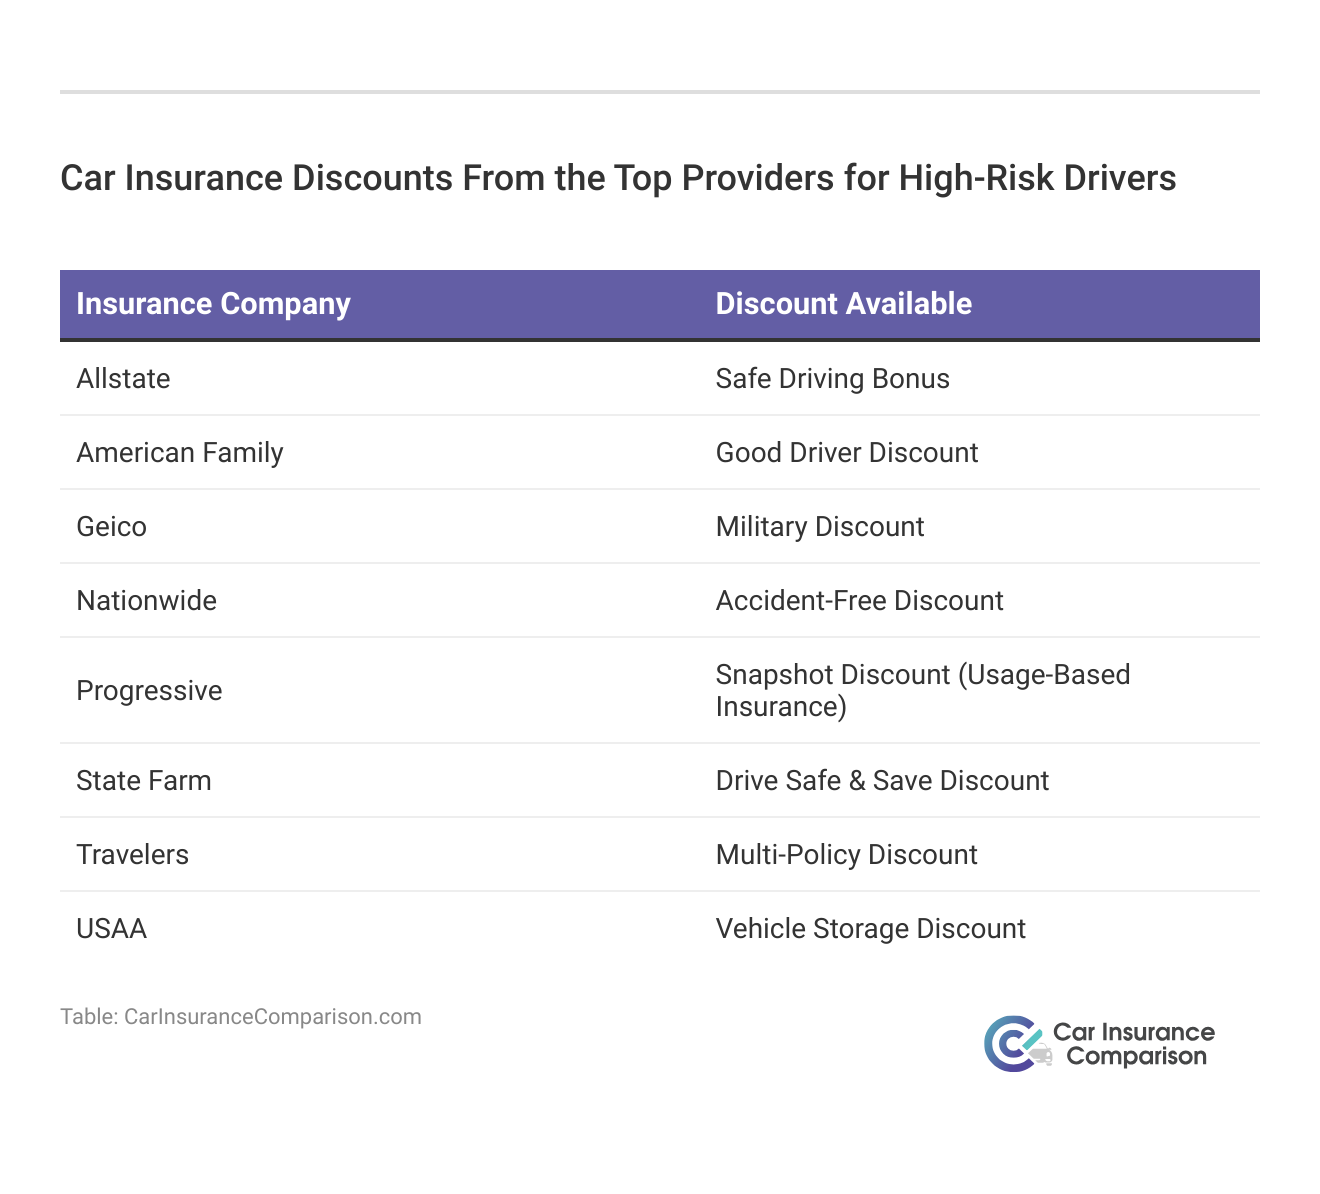 <h3>Car Insurance Discounts From the Top Providers for High-Risk Drivers</h3>